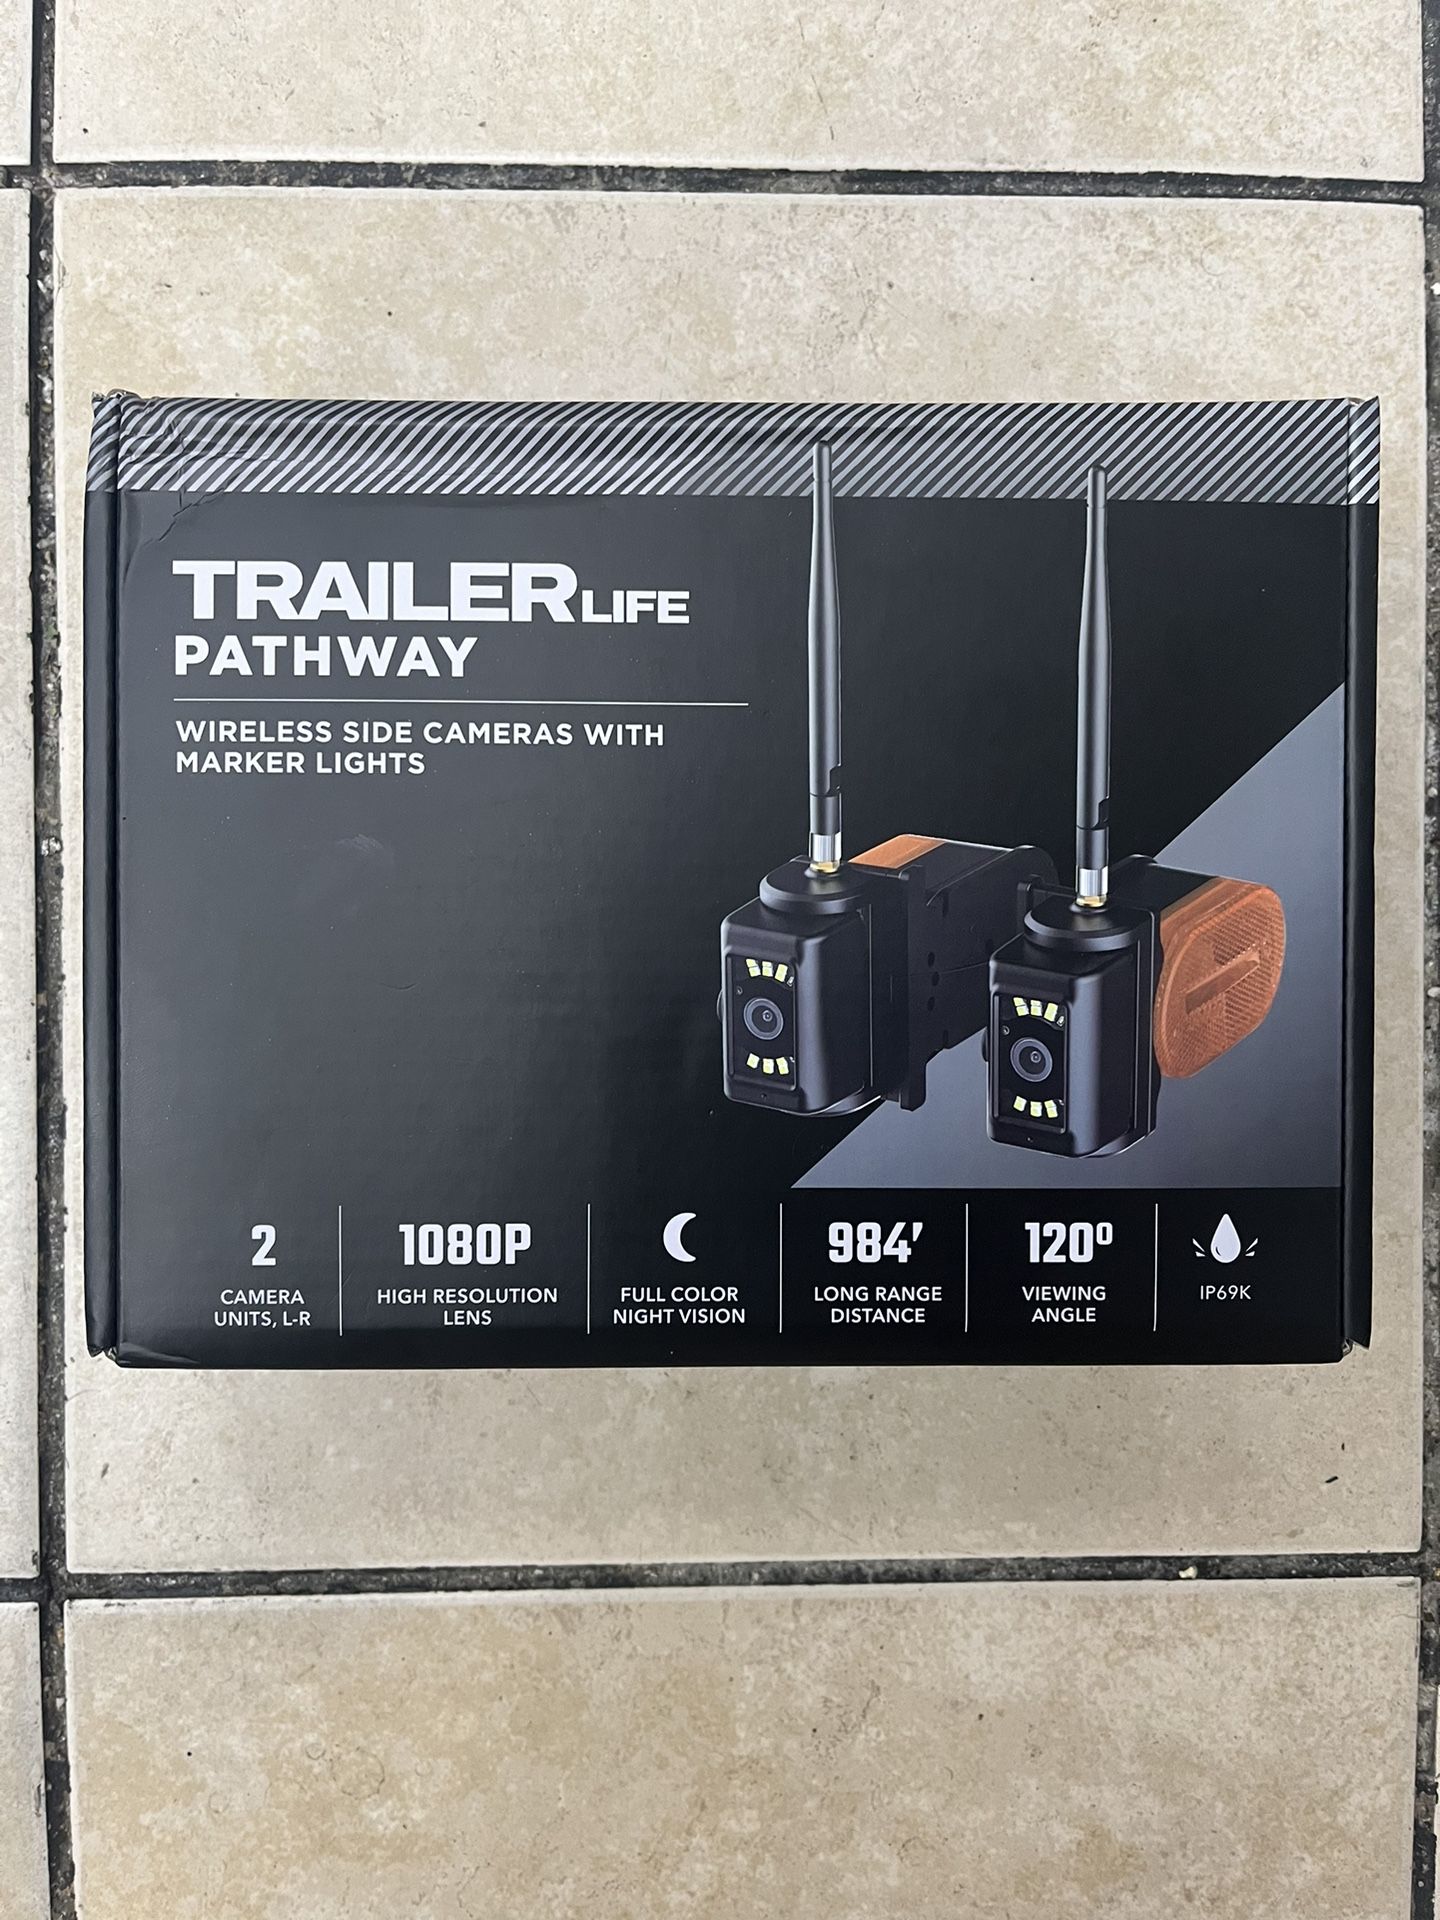 TrailerLife Pathway Wirless Side Camera 1080p New In Box 